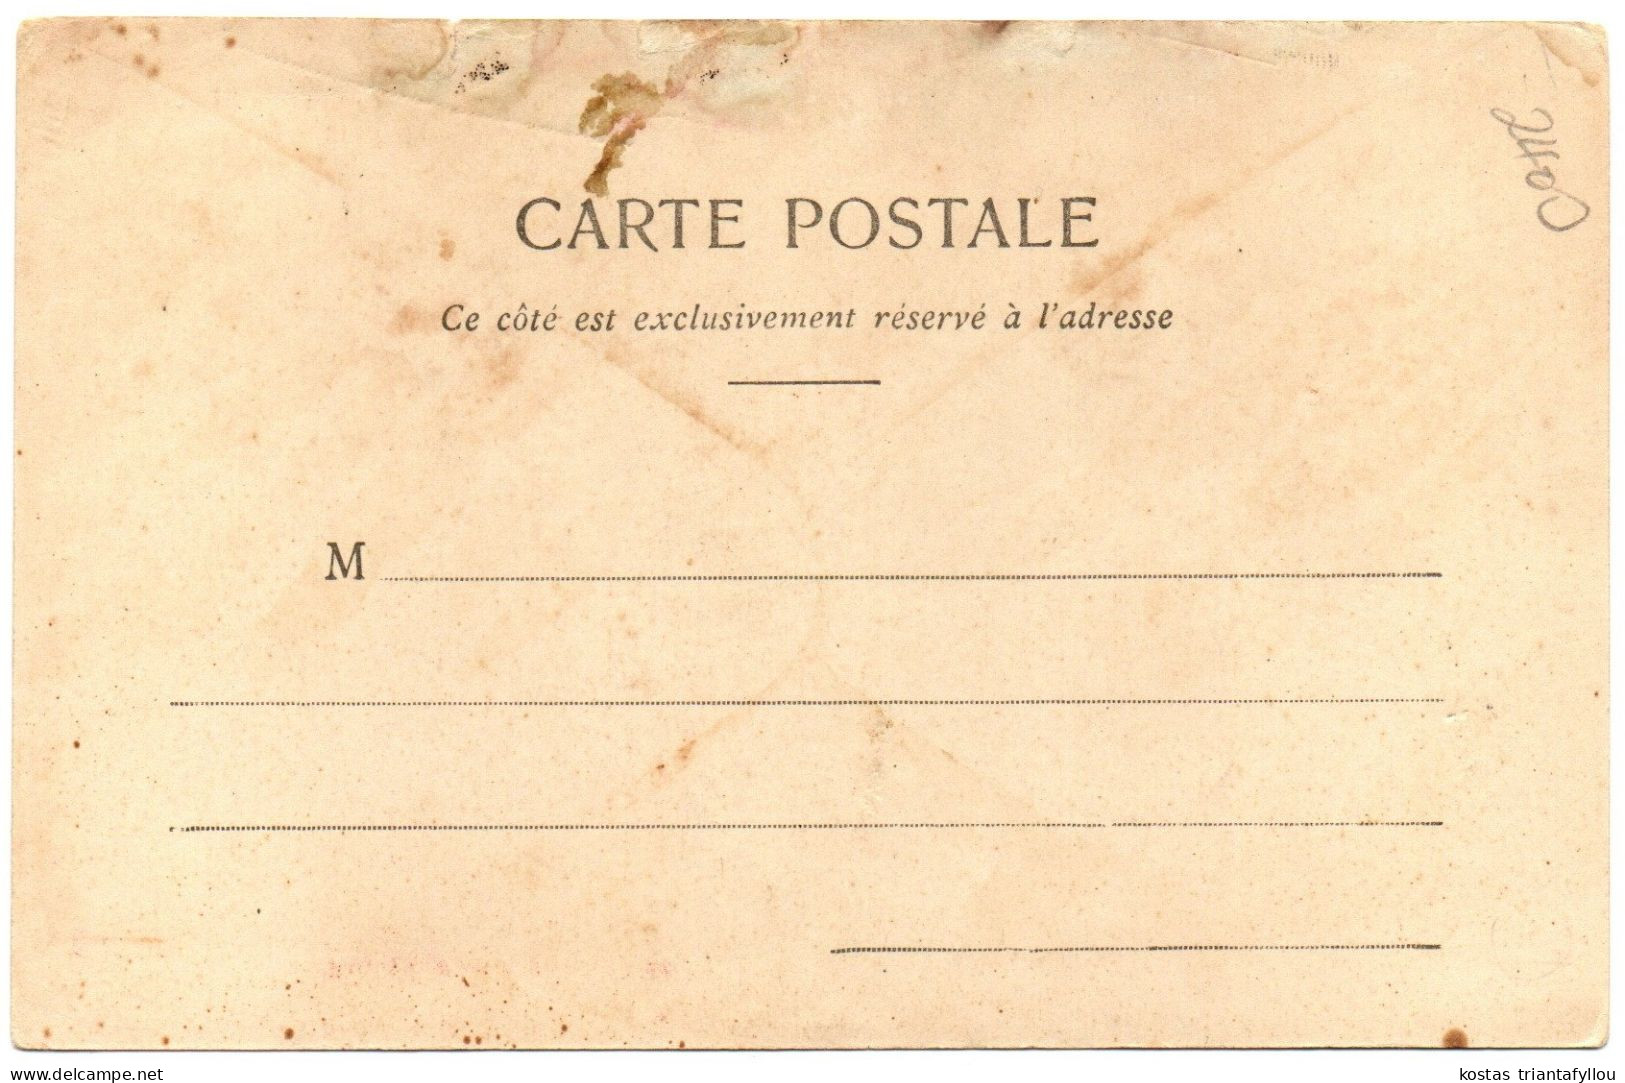 1.8.21 FRANCE,NOS CYCLISTES, EL PROFESIONNEL, POSTCARD (FOLD IN THE UPPER HALF OF THE MIDDLE PART) - Radsport